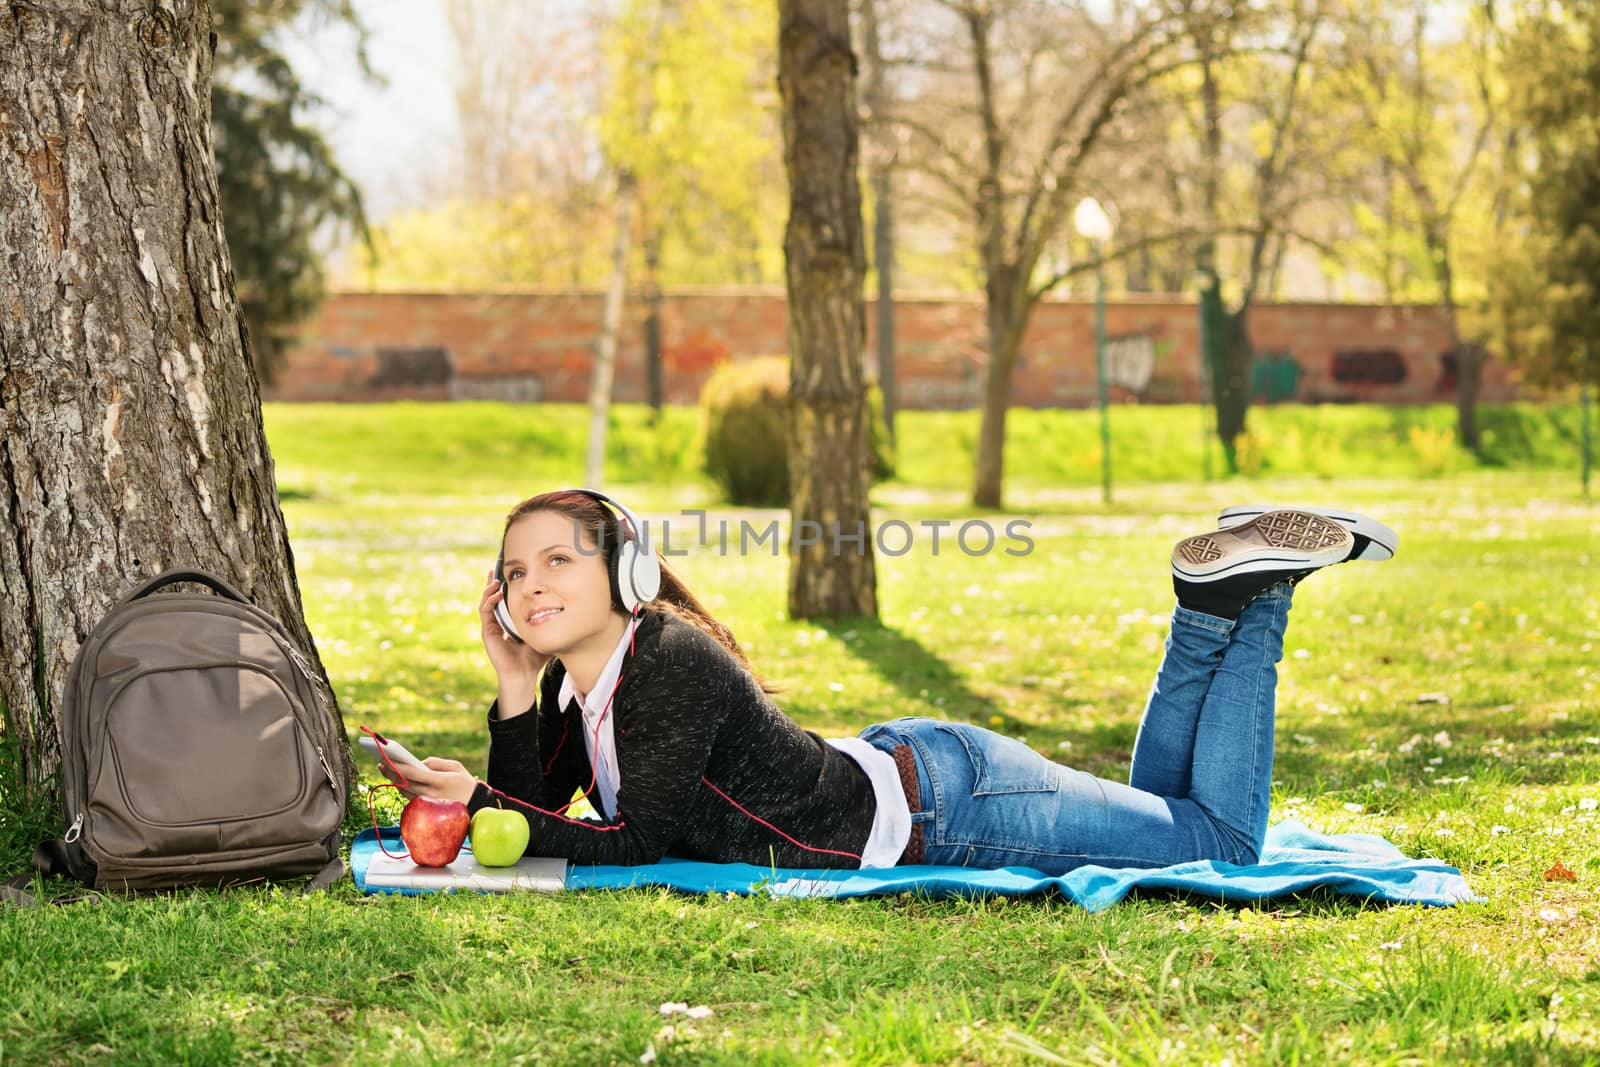 Daydreaming in the park listening music. Beautiful female student, lying on a blanket on the grass in a park listening to music. Student taking a break from studying.